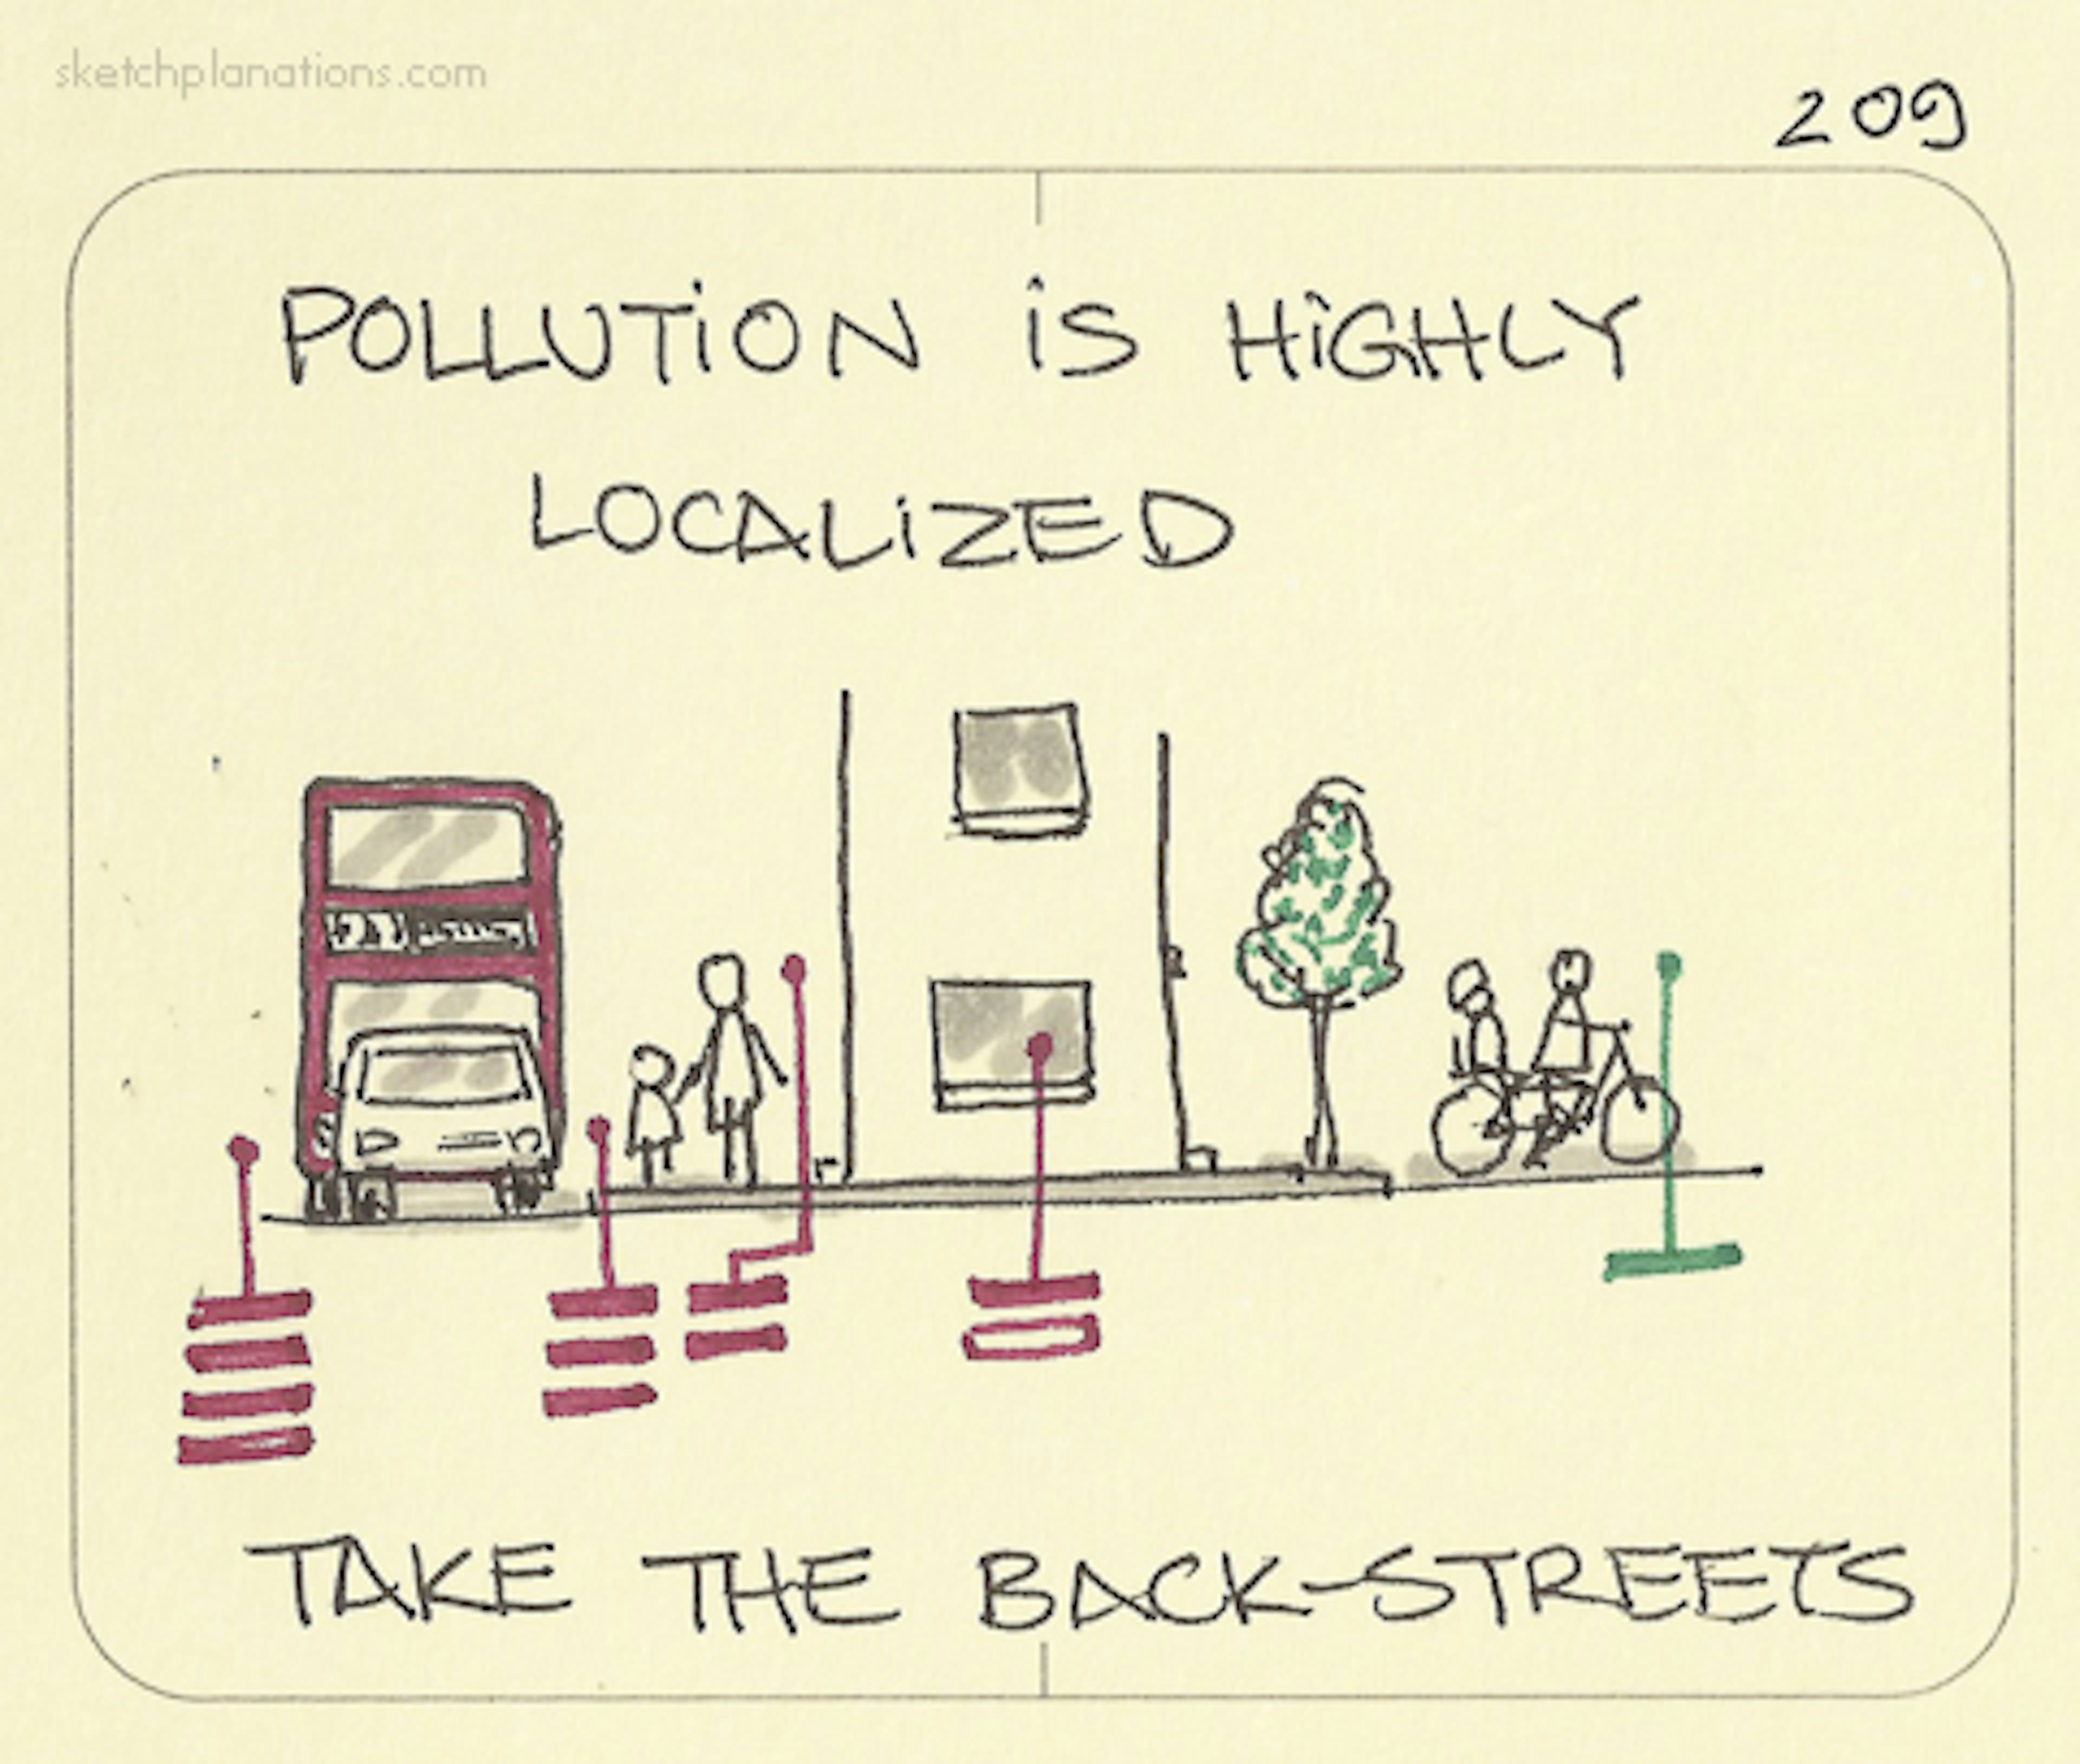 A busy street showing how the pollution varies in different locations compared to a back street which is much cleaner